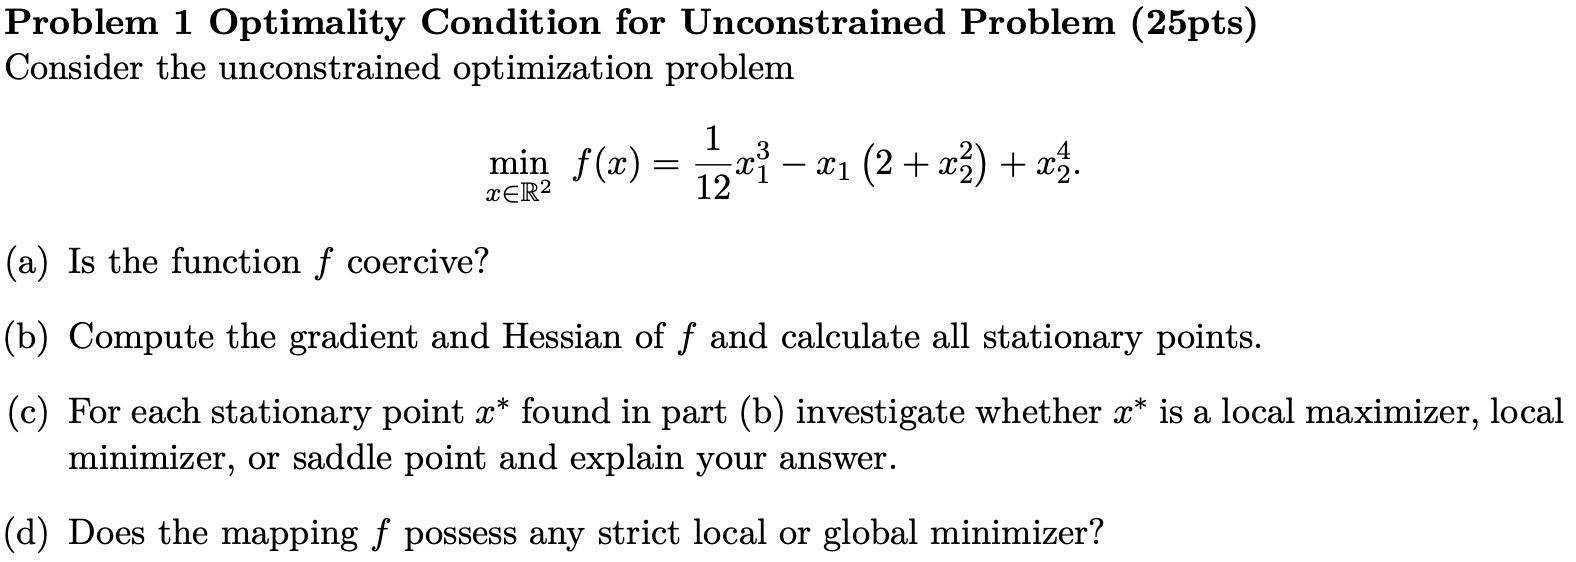 how to solve unconstrained optimization problem